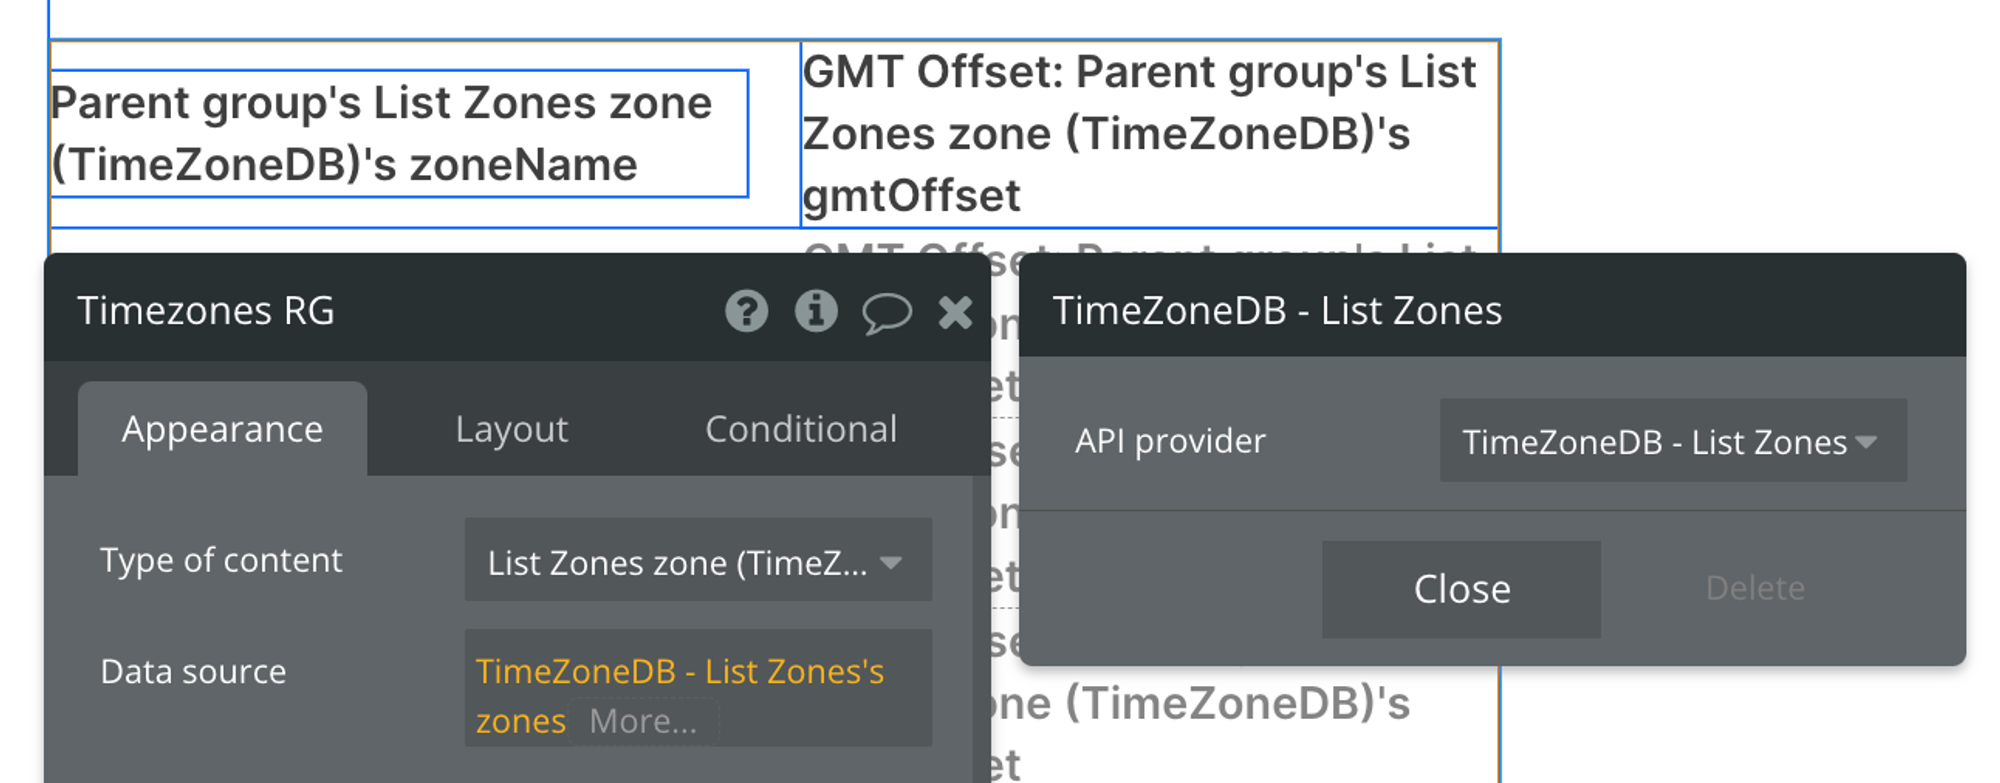 Select "Get Data from External API" for the Data to display, then find "TimeZoneDB - List Zones" from the list of API Providers